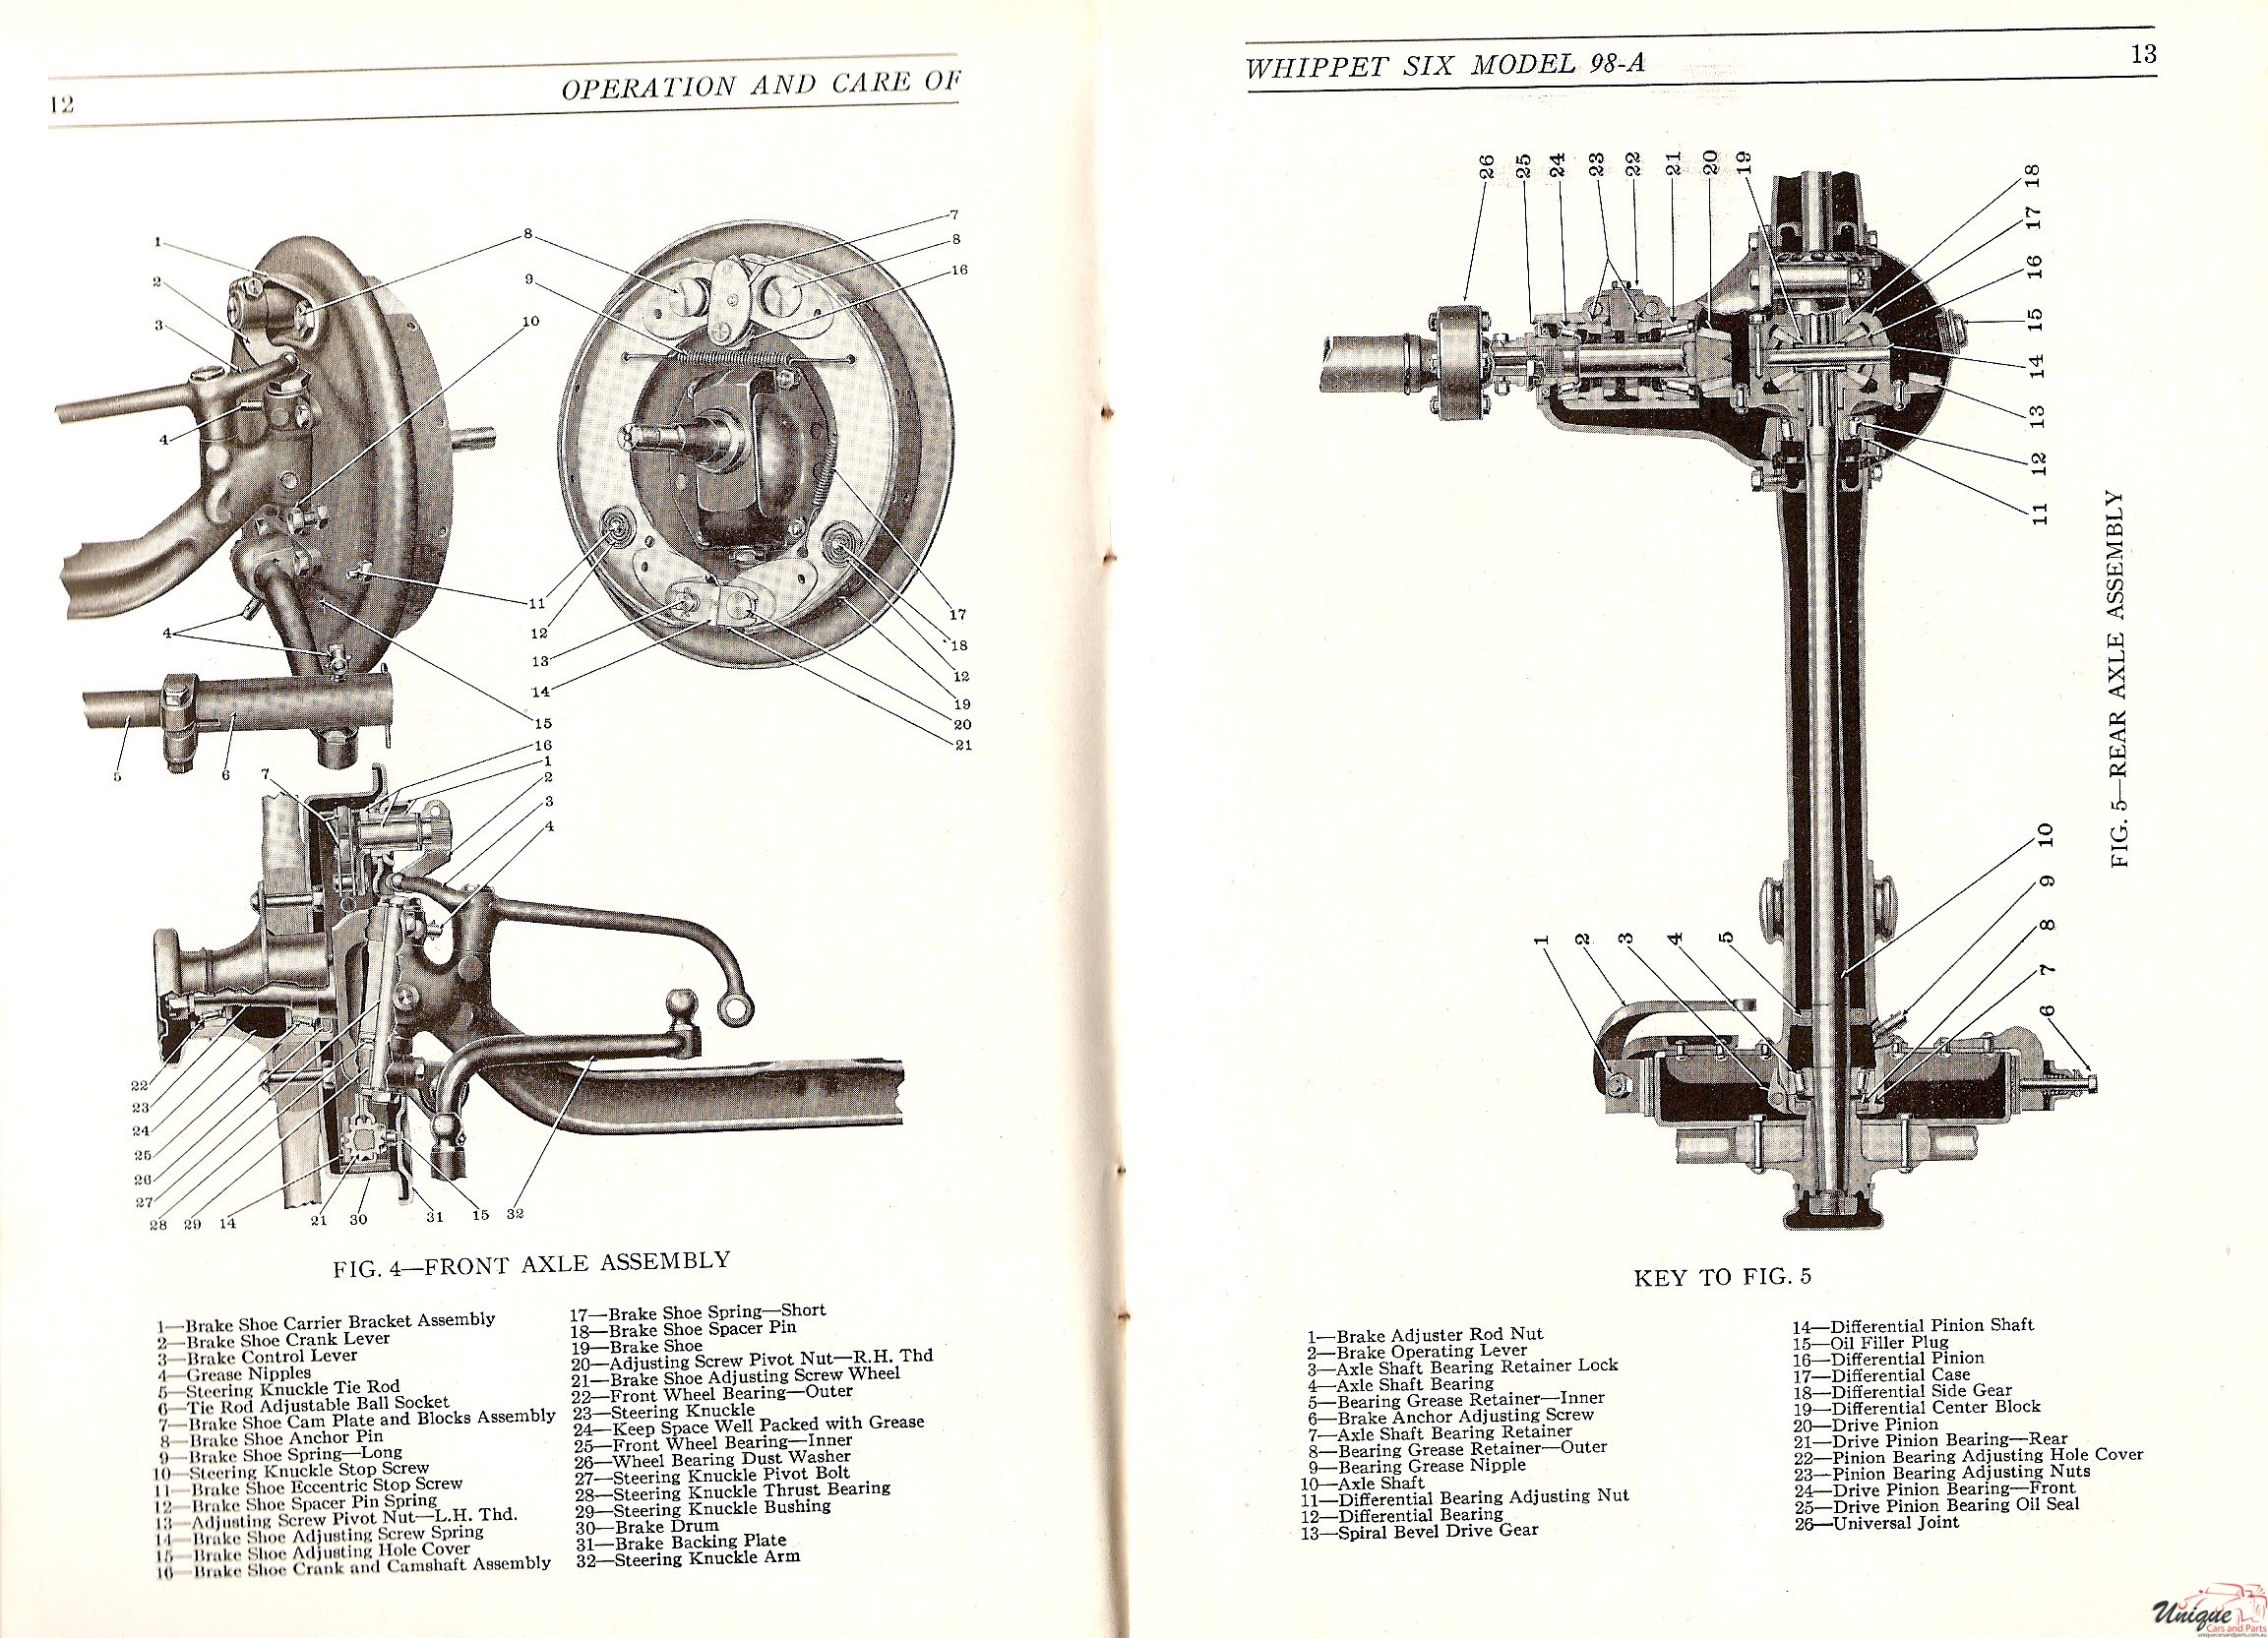 1929 Whippet Operator Manual Page 7